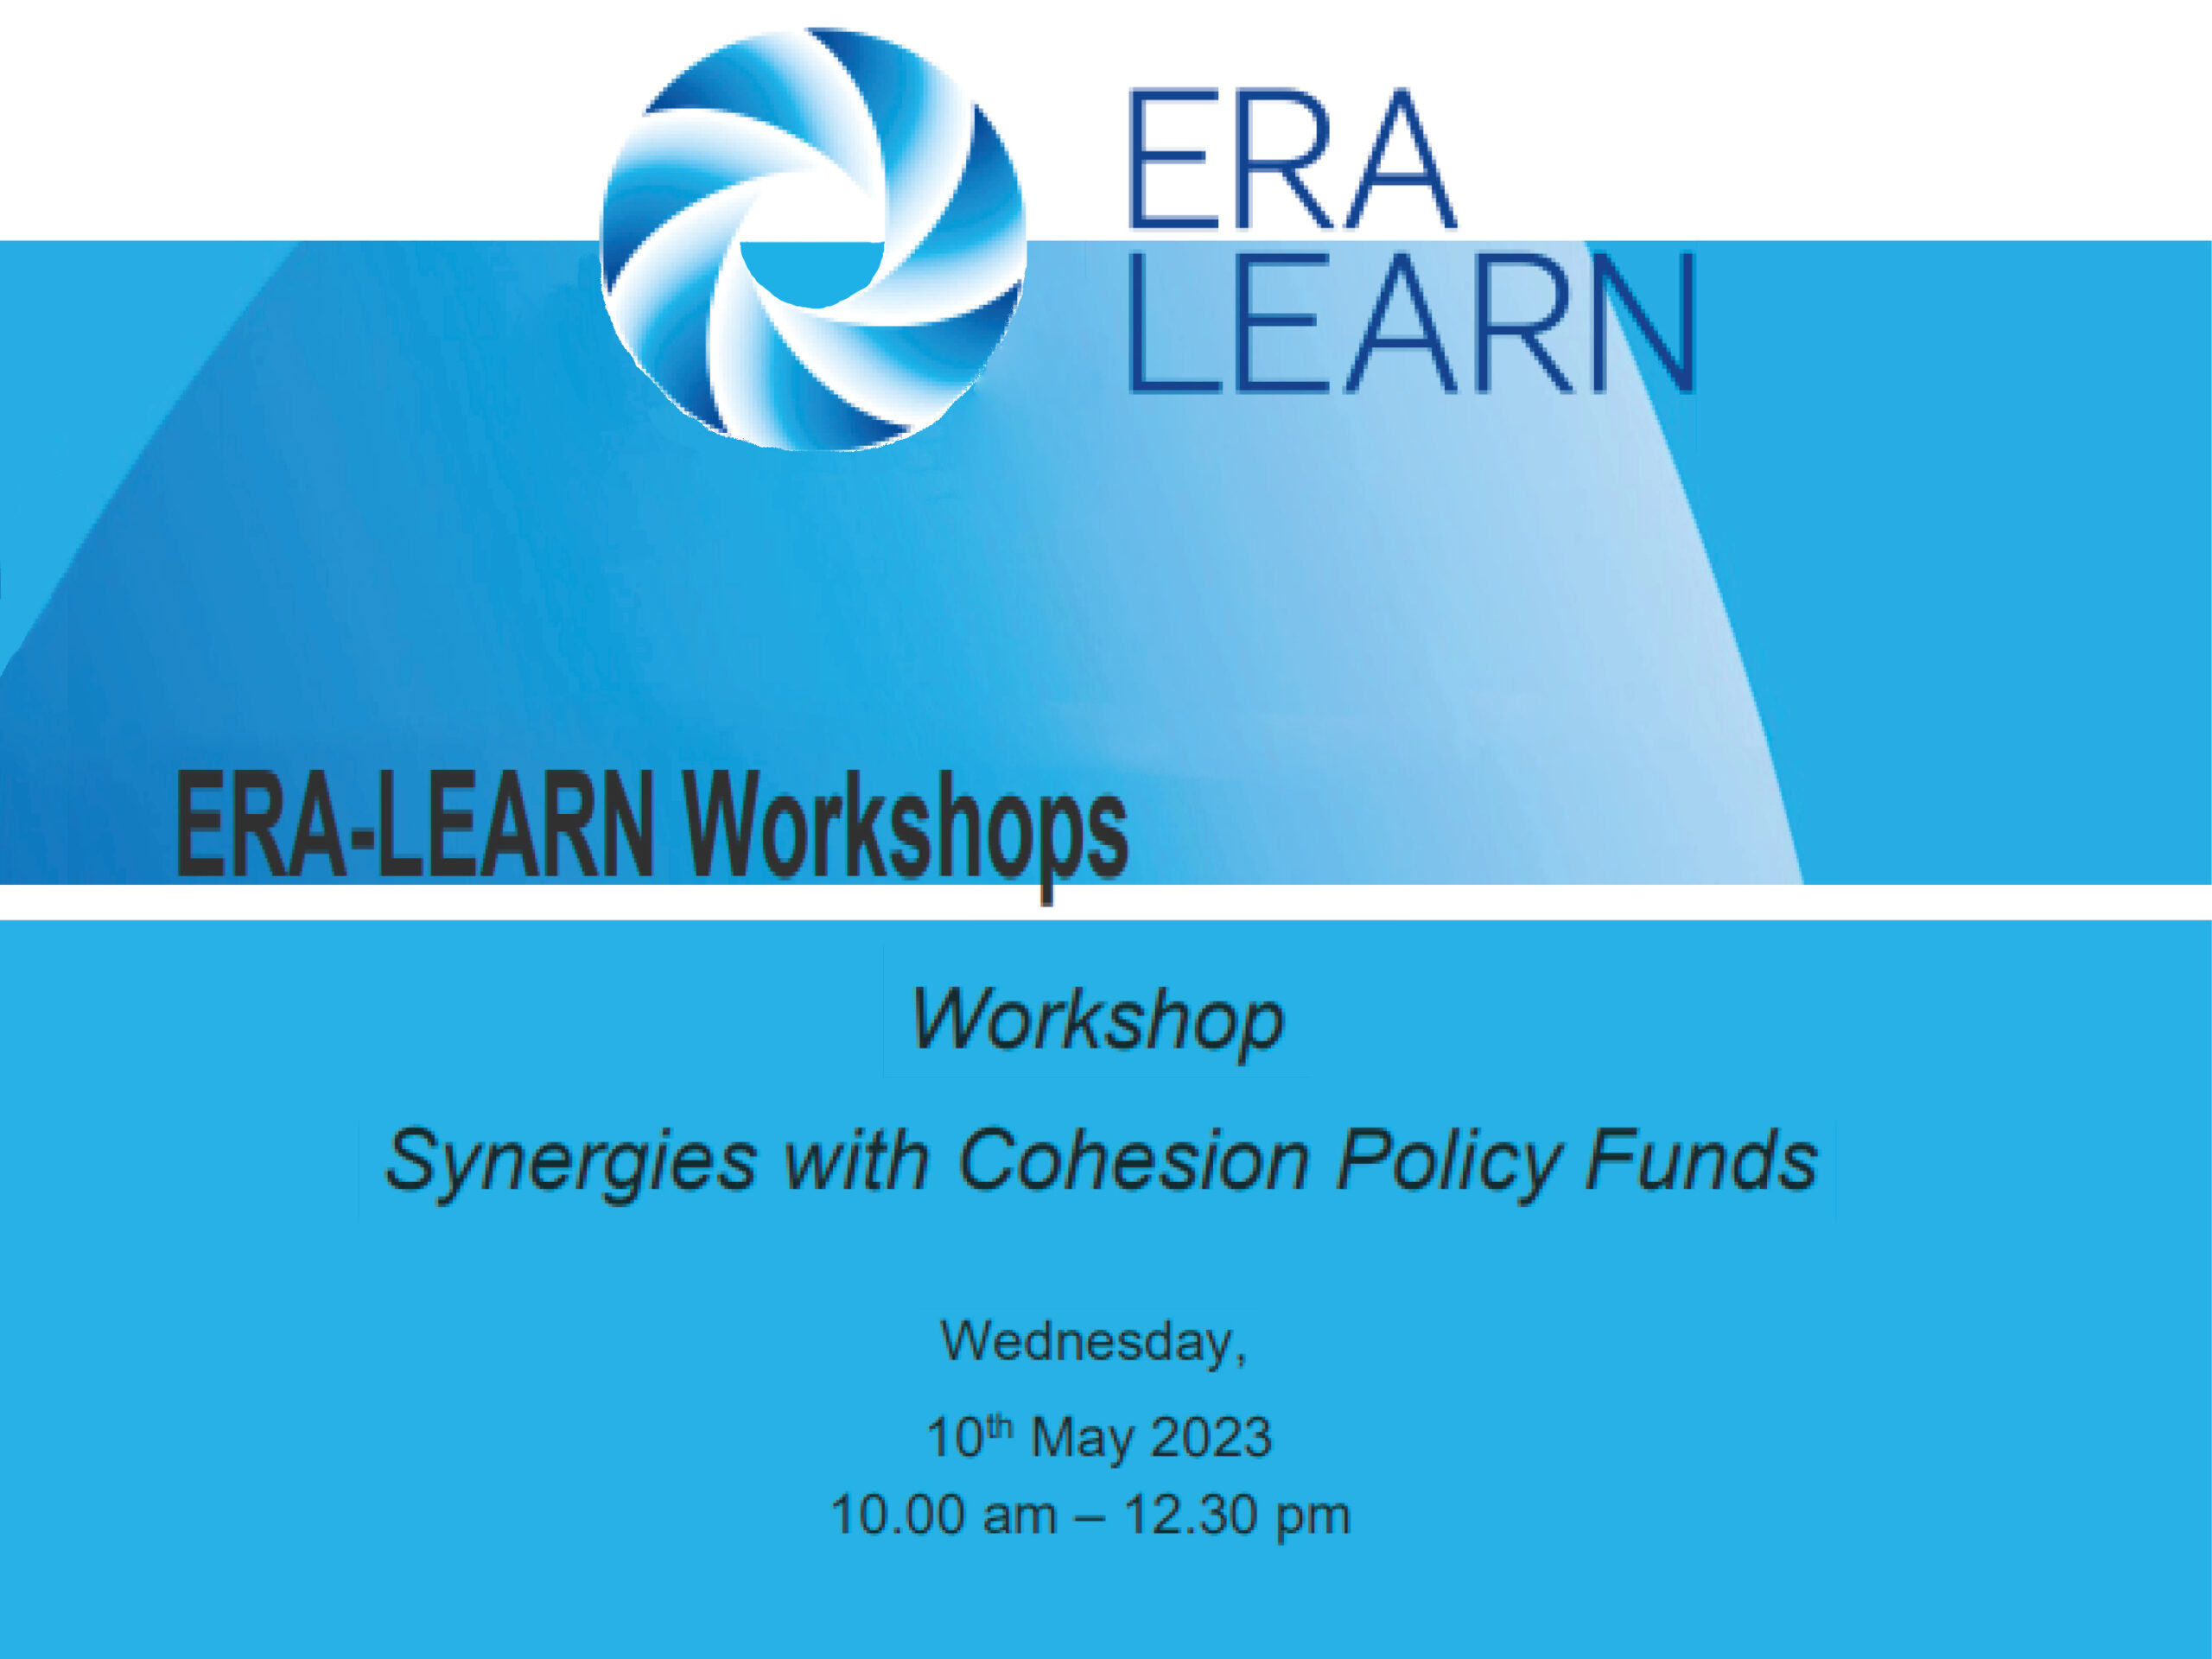 ERA-LEARN Workshop - Synergies with Cohesion Policy Funds - 10 maggio 2023